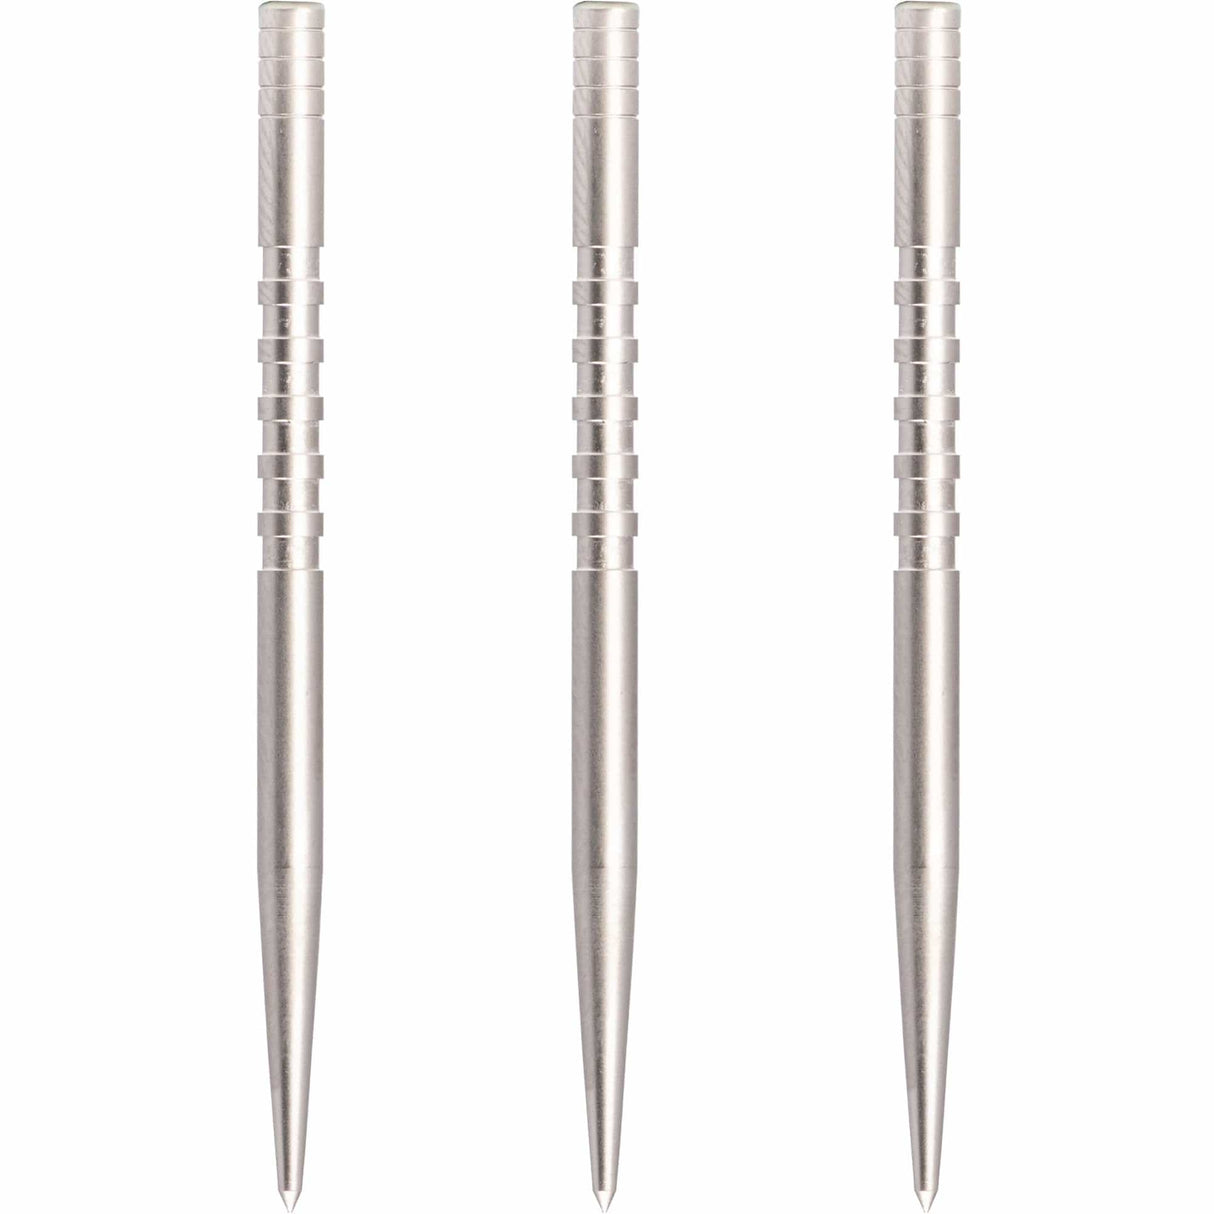 Condor Beak Dart Points - Steel Tip Replacement Points - with Cut - Silver